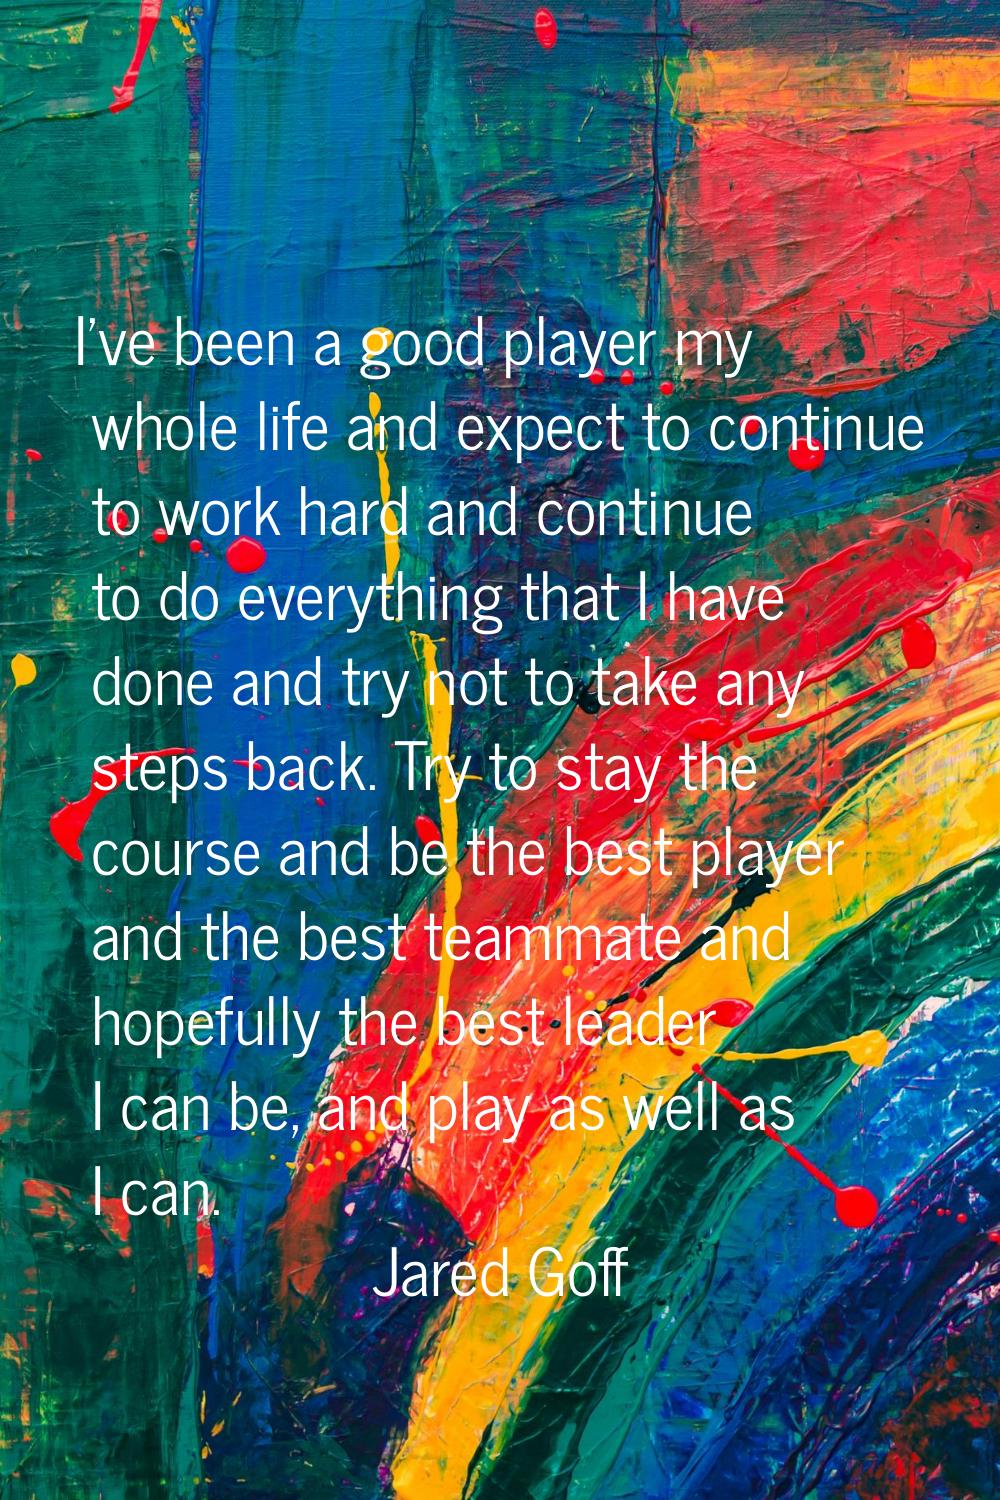 I've been a good player my whole life and expect to continue to work hard and continue to do everyt